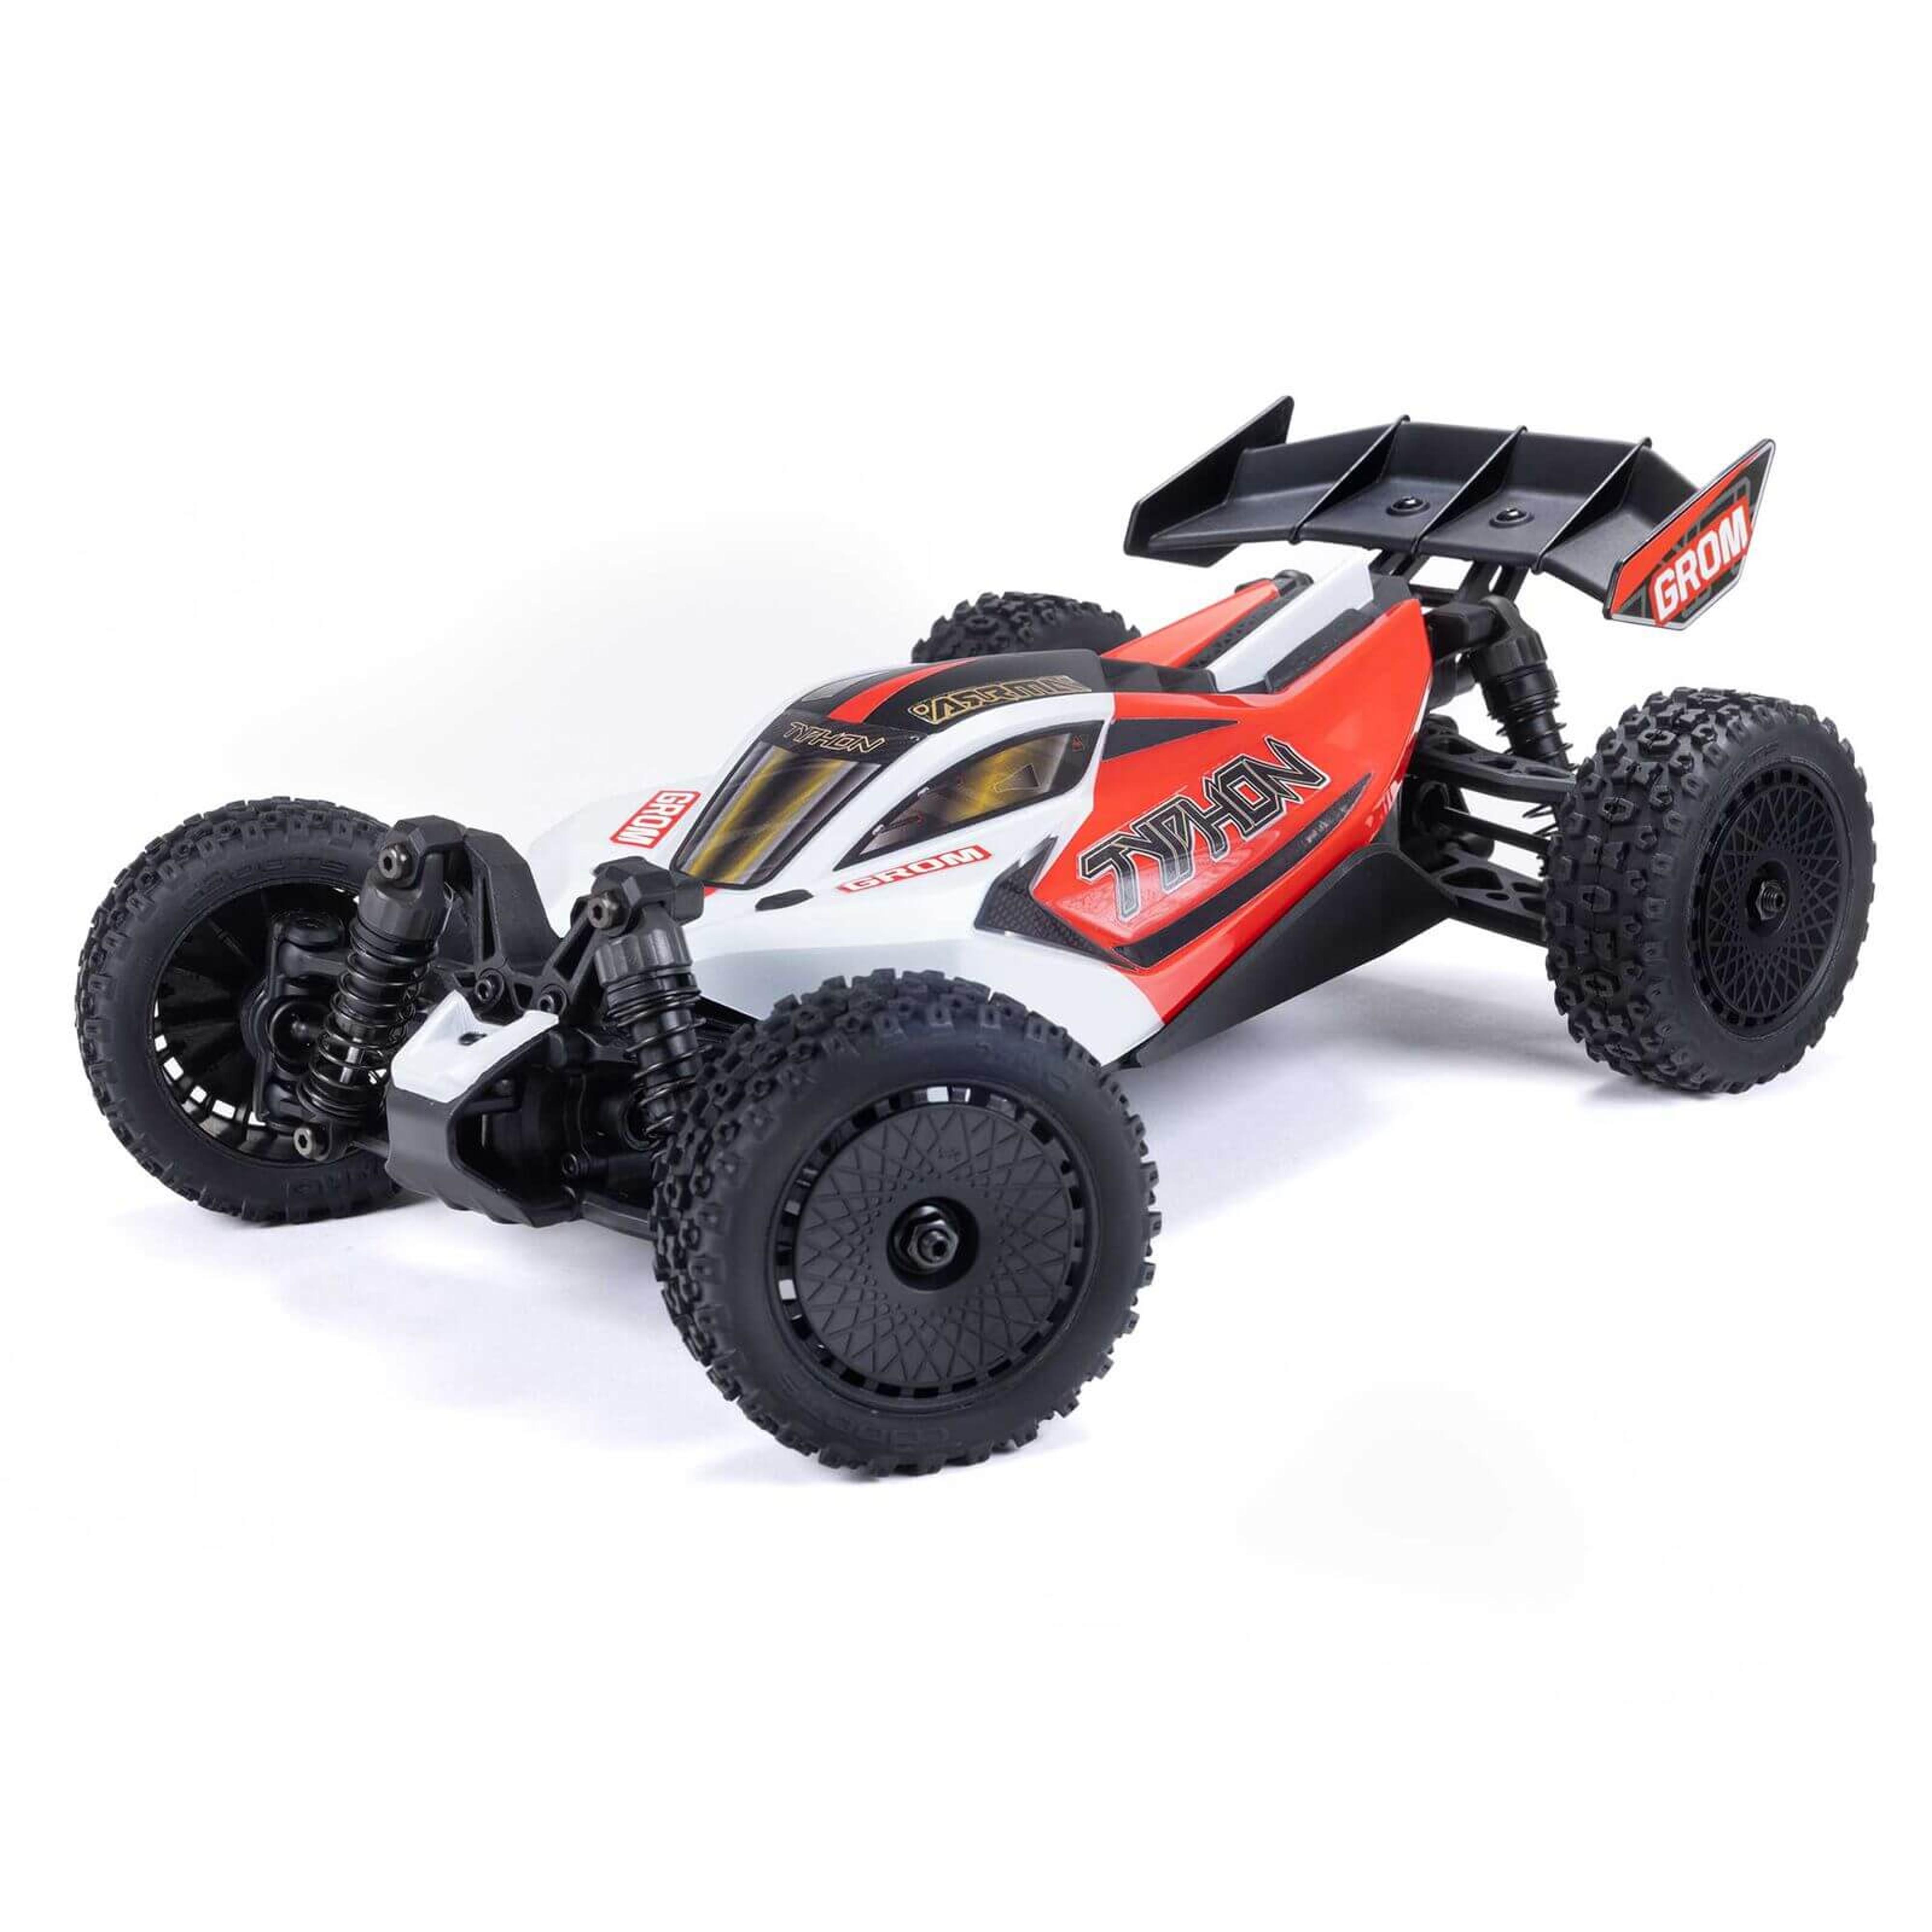 Typhon Grom Mega 380 Brushed 4x4 Small Scale Buggy RTR R/C (Red/White)